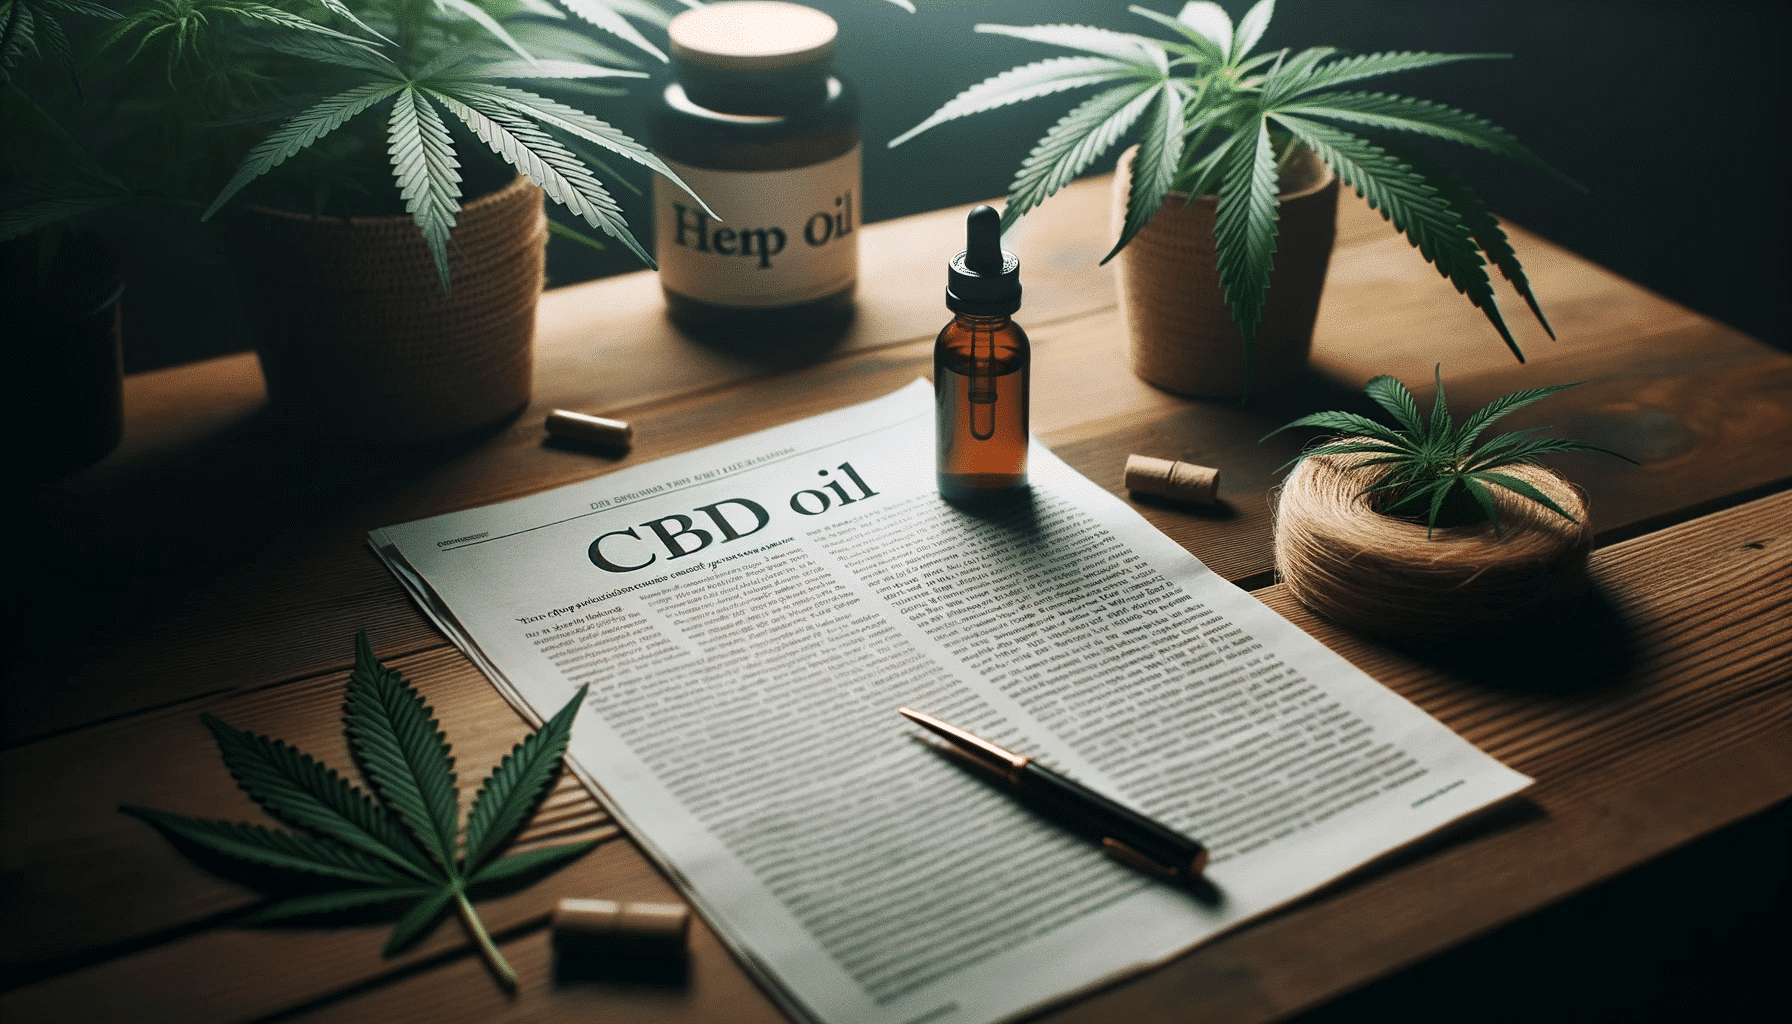 Photo of a printed article with the provided text, placed on a wooden table next to a CBD oil bottle and a hemp plant. The scene is lit by soft lighting, creating a focused and contemplative mood.